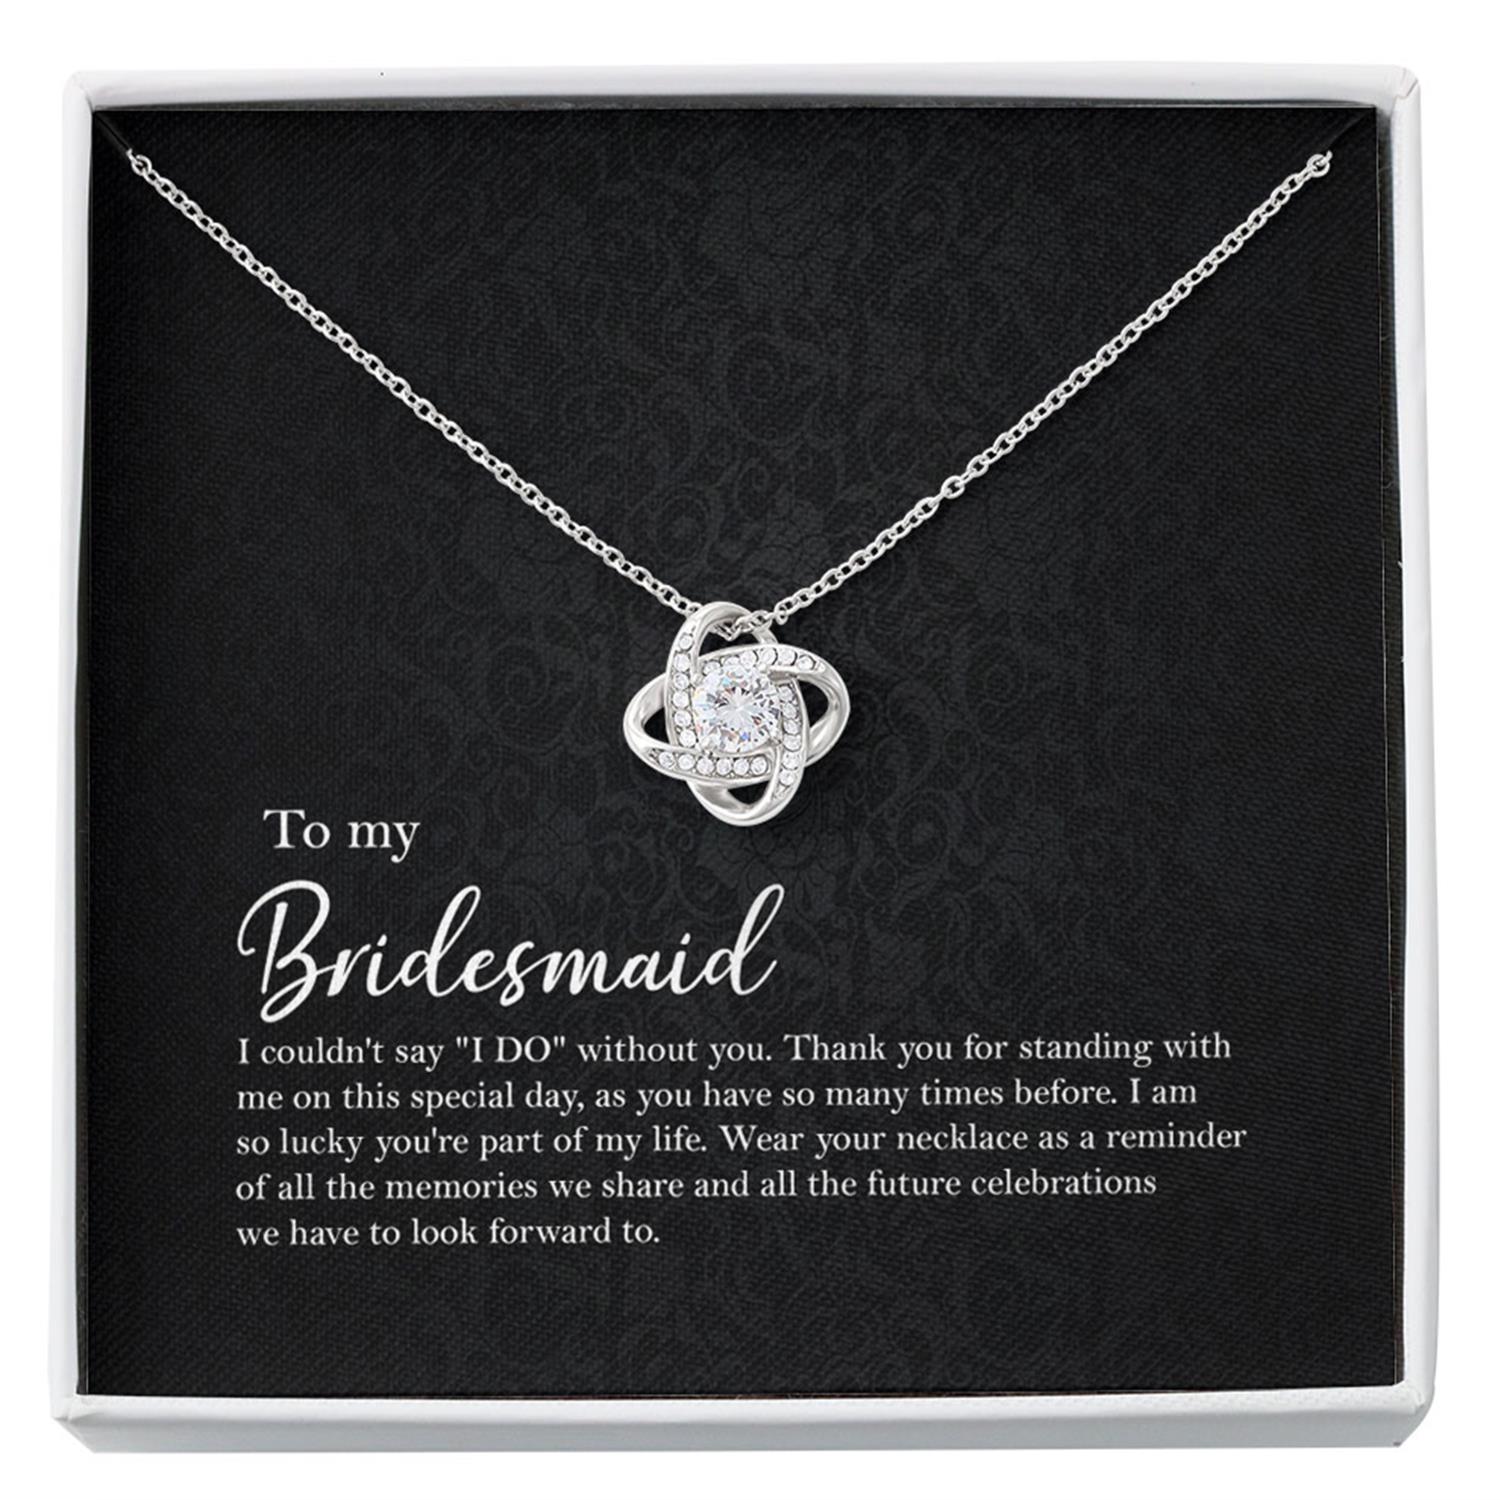 To My Bridesmaid Necklace I Couldn't Say I DO Without You Gift For Bridesmaid, Wedding Day Gift Custom Necklace